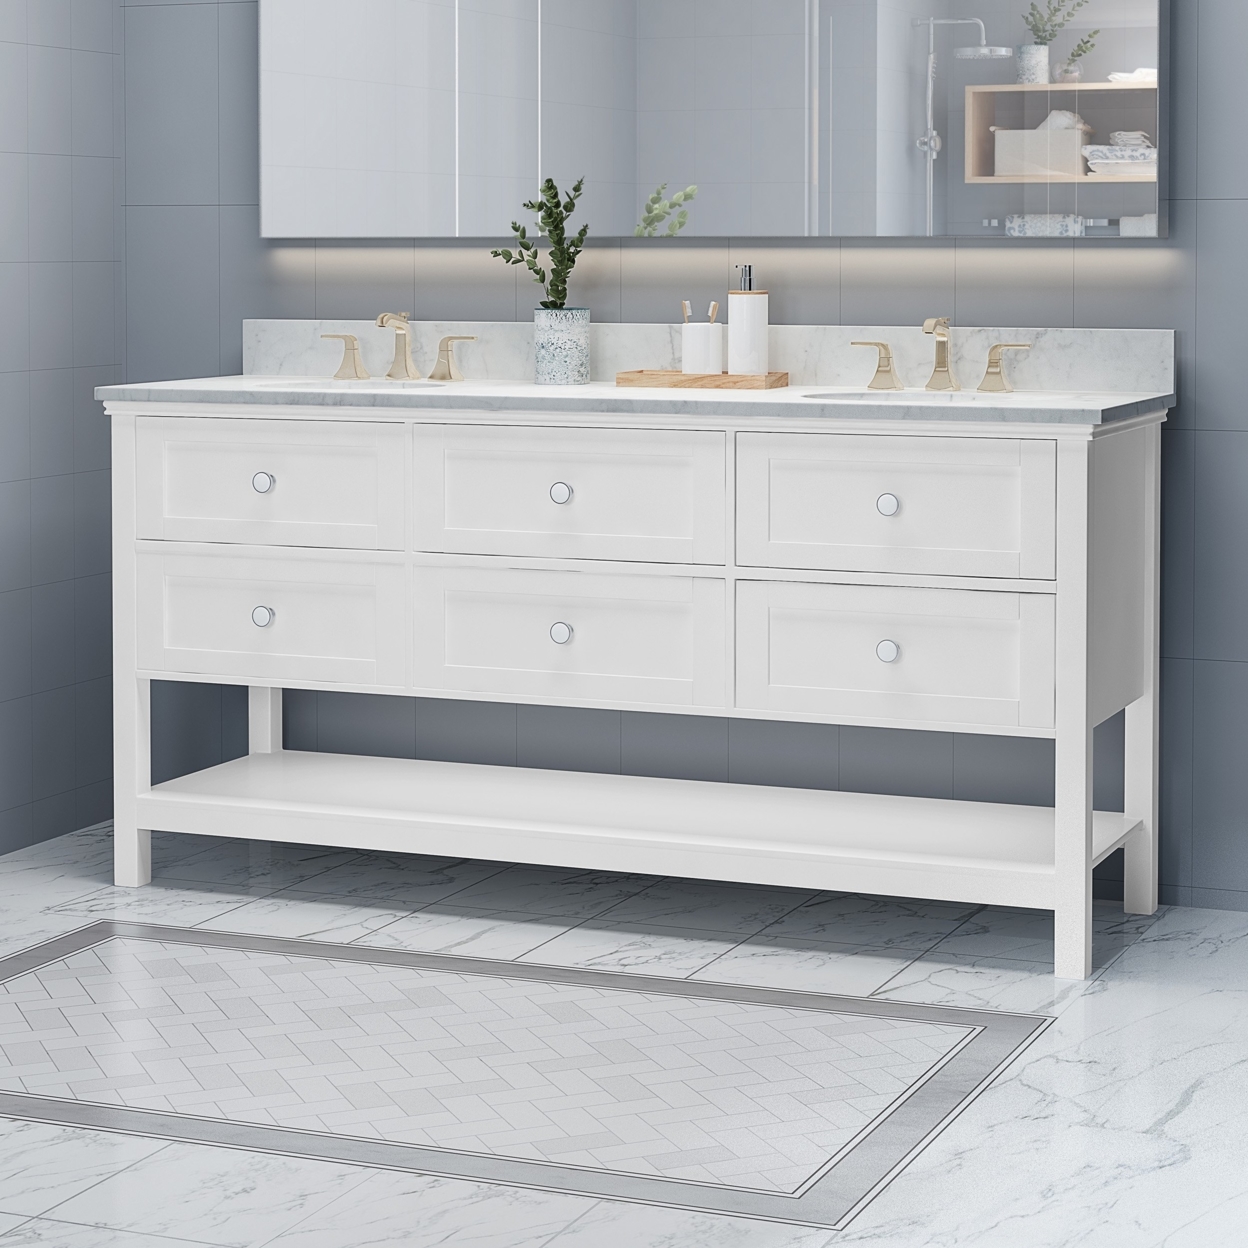 Douvier Contemporary 72 Wood Bathroom Vanity (Counter Top Not Included) - Gray